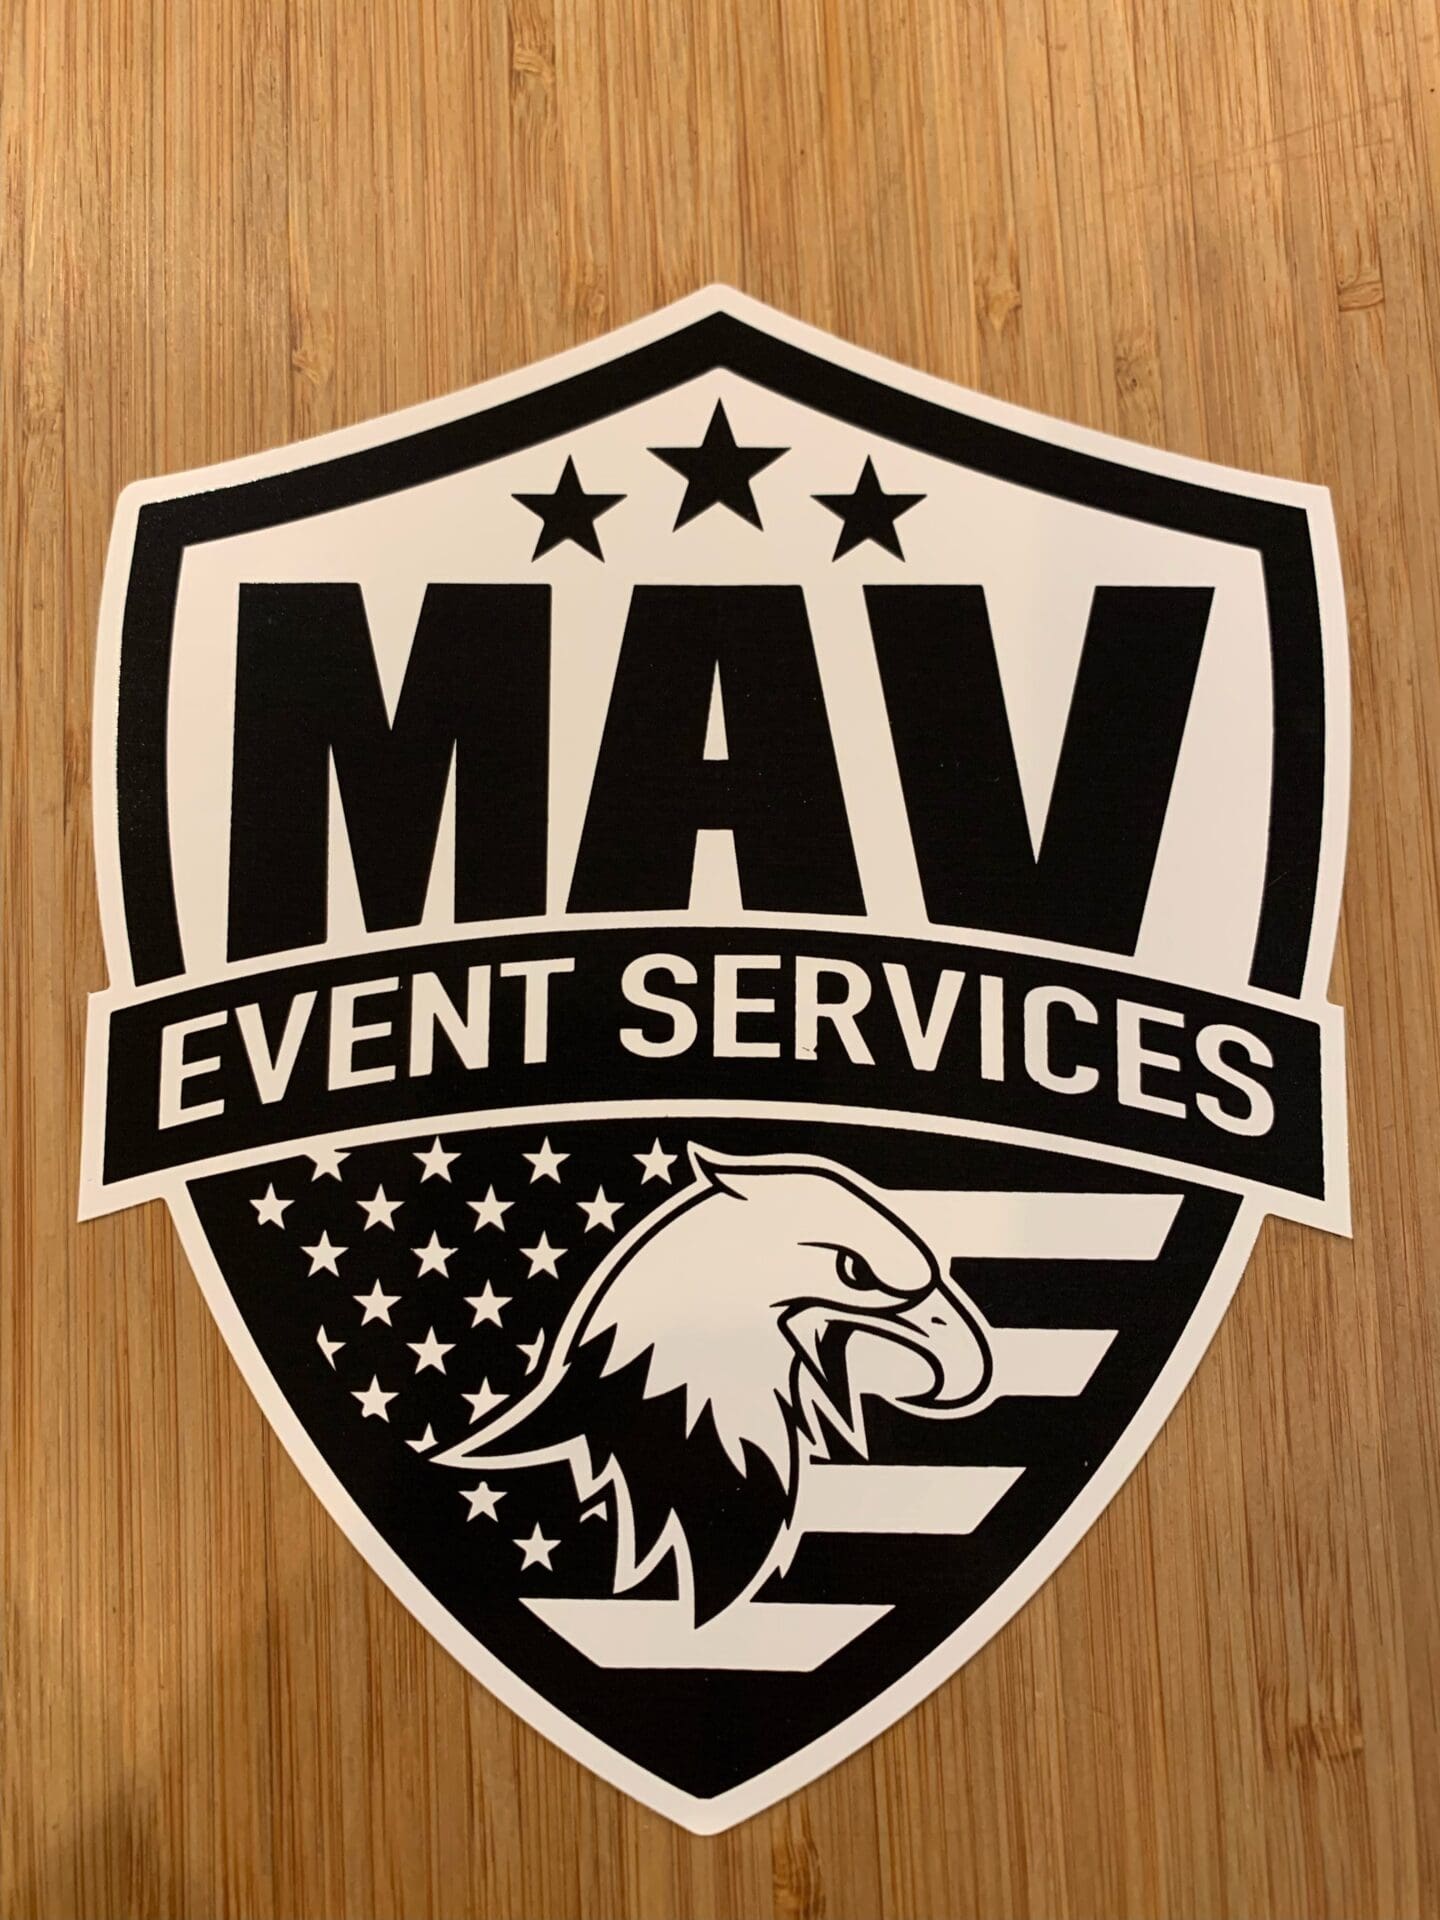 A black and white logo of an event services company.